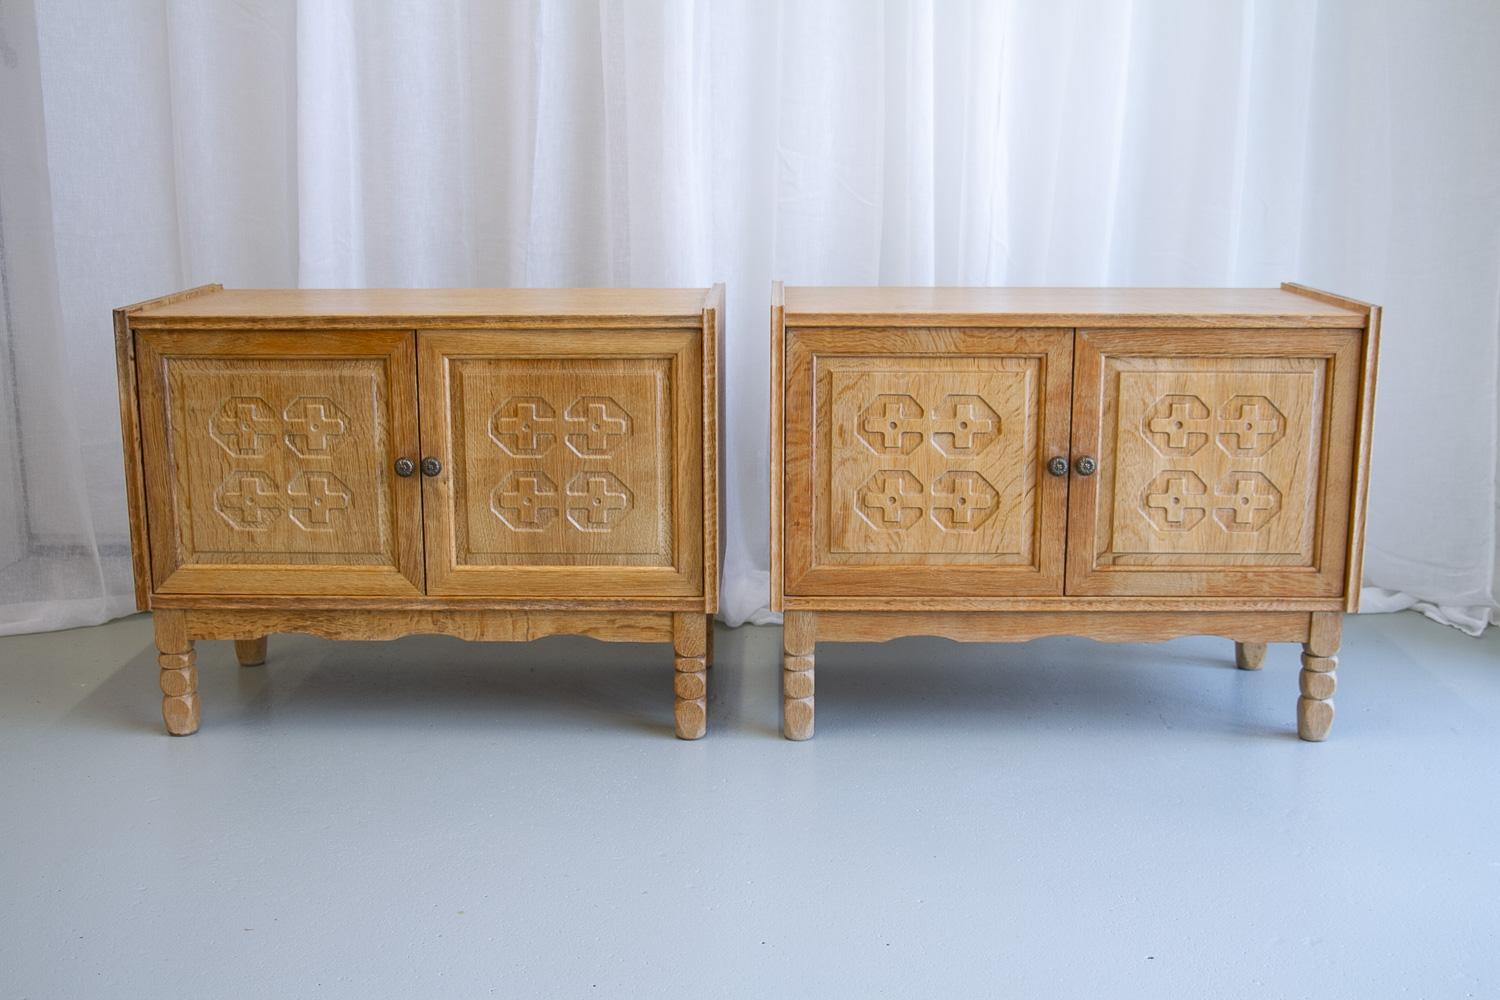 Danish Modern Oak Cabinets by Kjærnulf, 1960s. Set of 2.
Pair of Danish Mid-century Modern cabinets or small sideboards in Nordic oak. Produced in Denmark in the 1960s and attributed to Danish designer Henning/Henry Kjærnulf who is world famous for